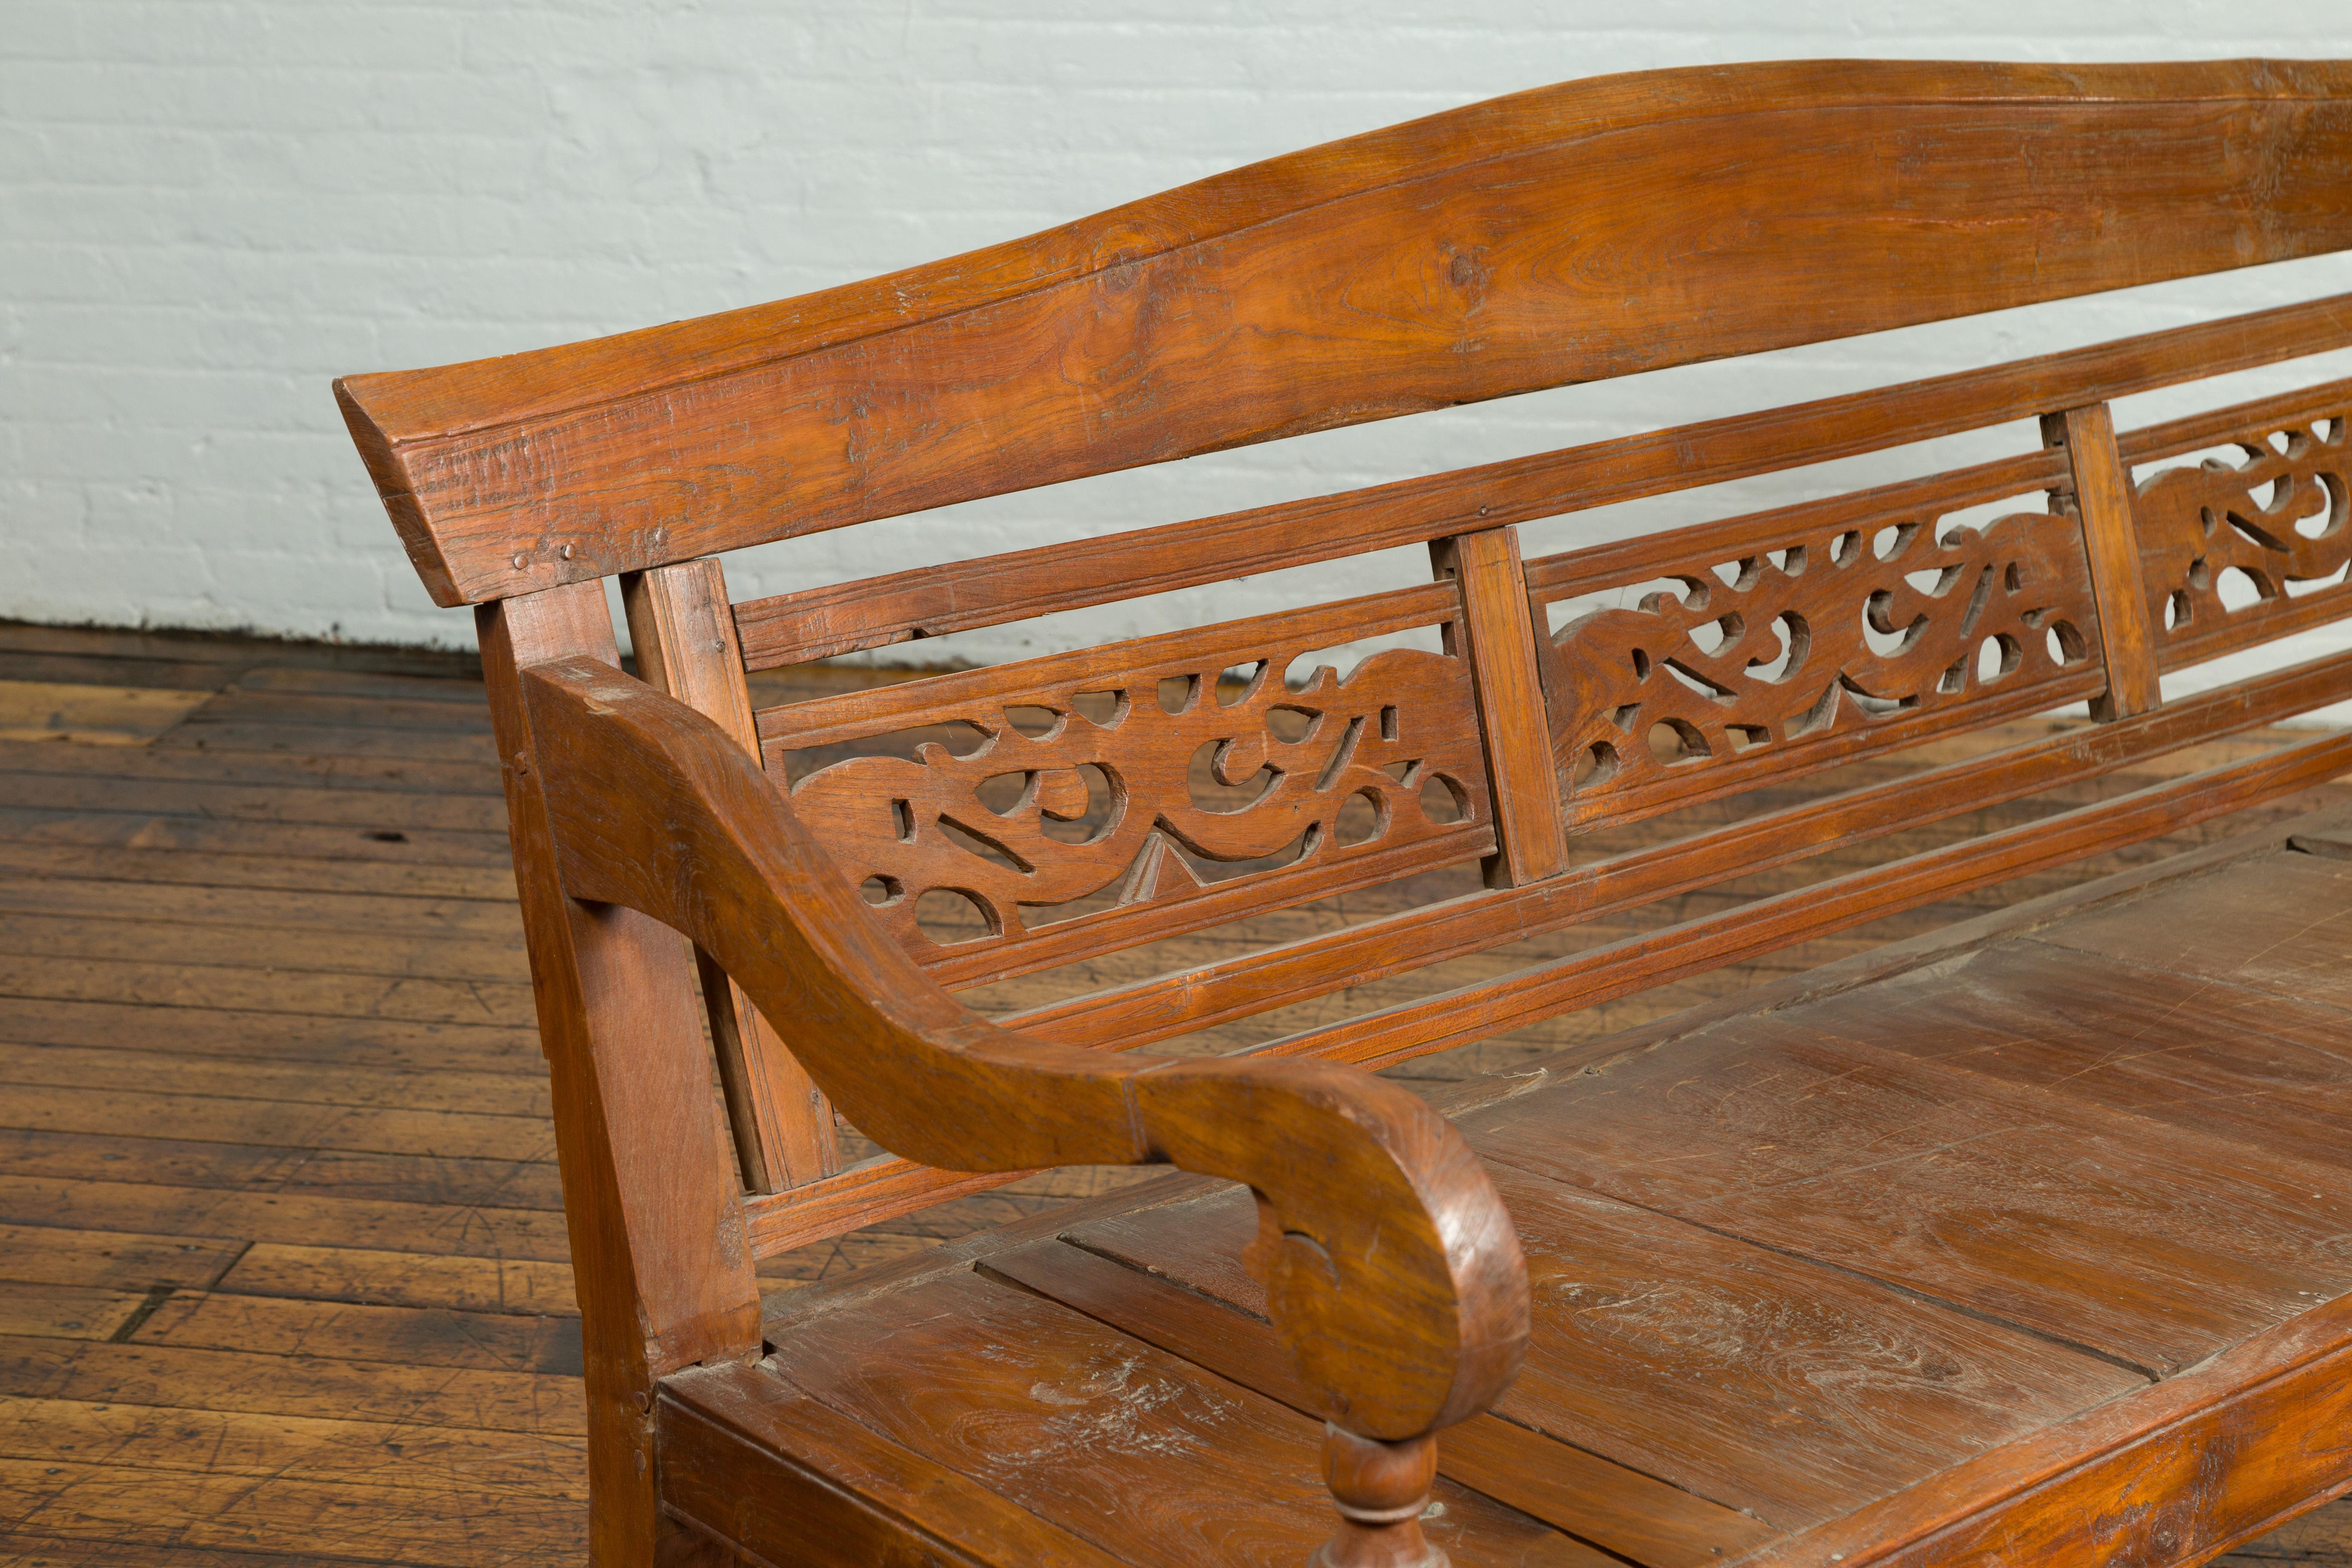 20th Century Dutch Colonial Antique Wooden Bench with Carved Camelback and Scrolling Arms